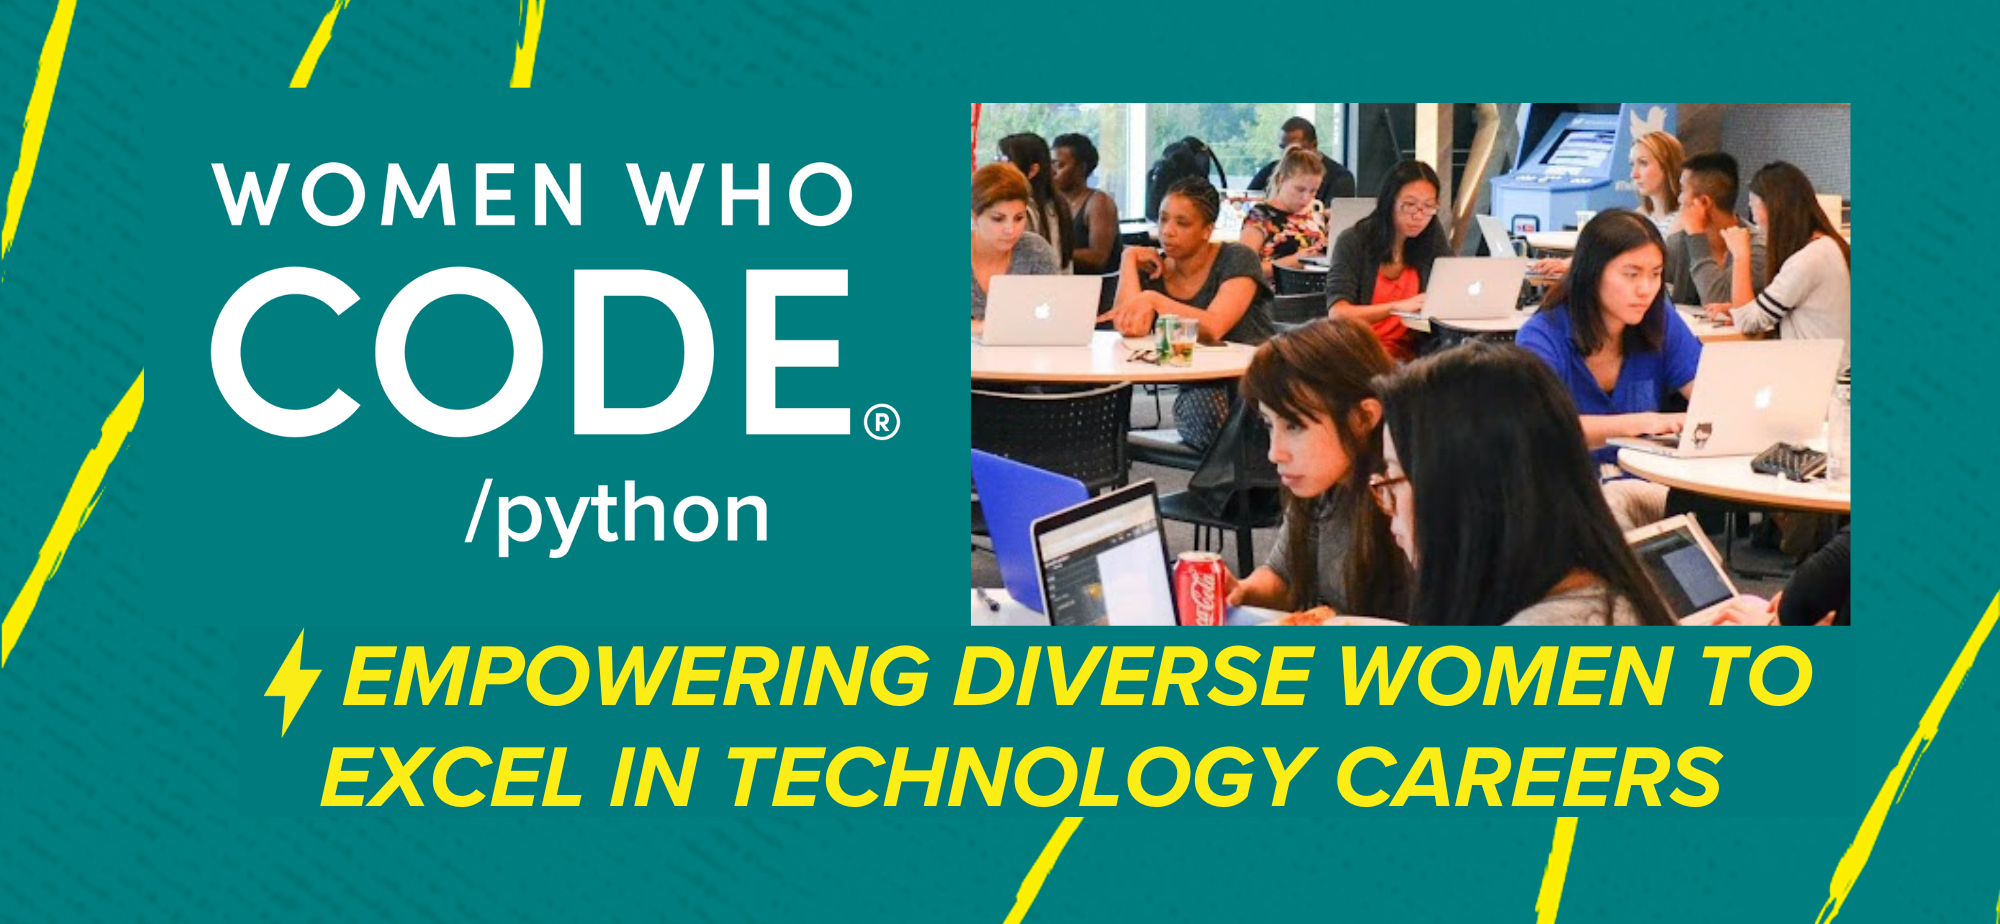 Women Who Code Python Technical Track.